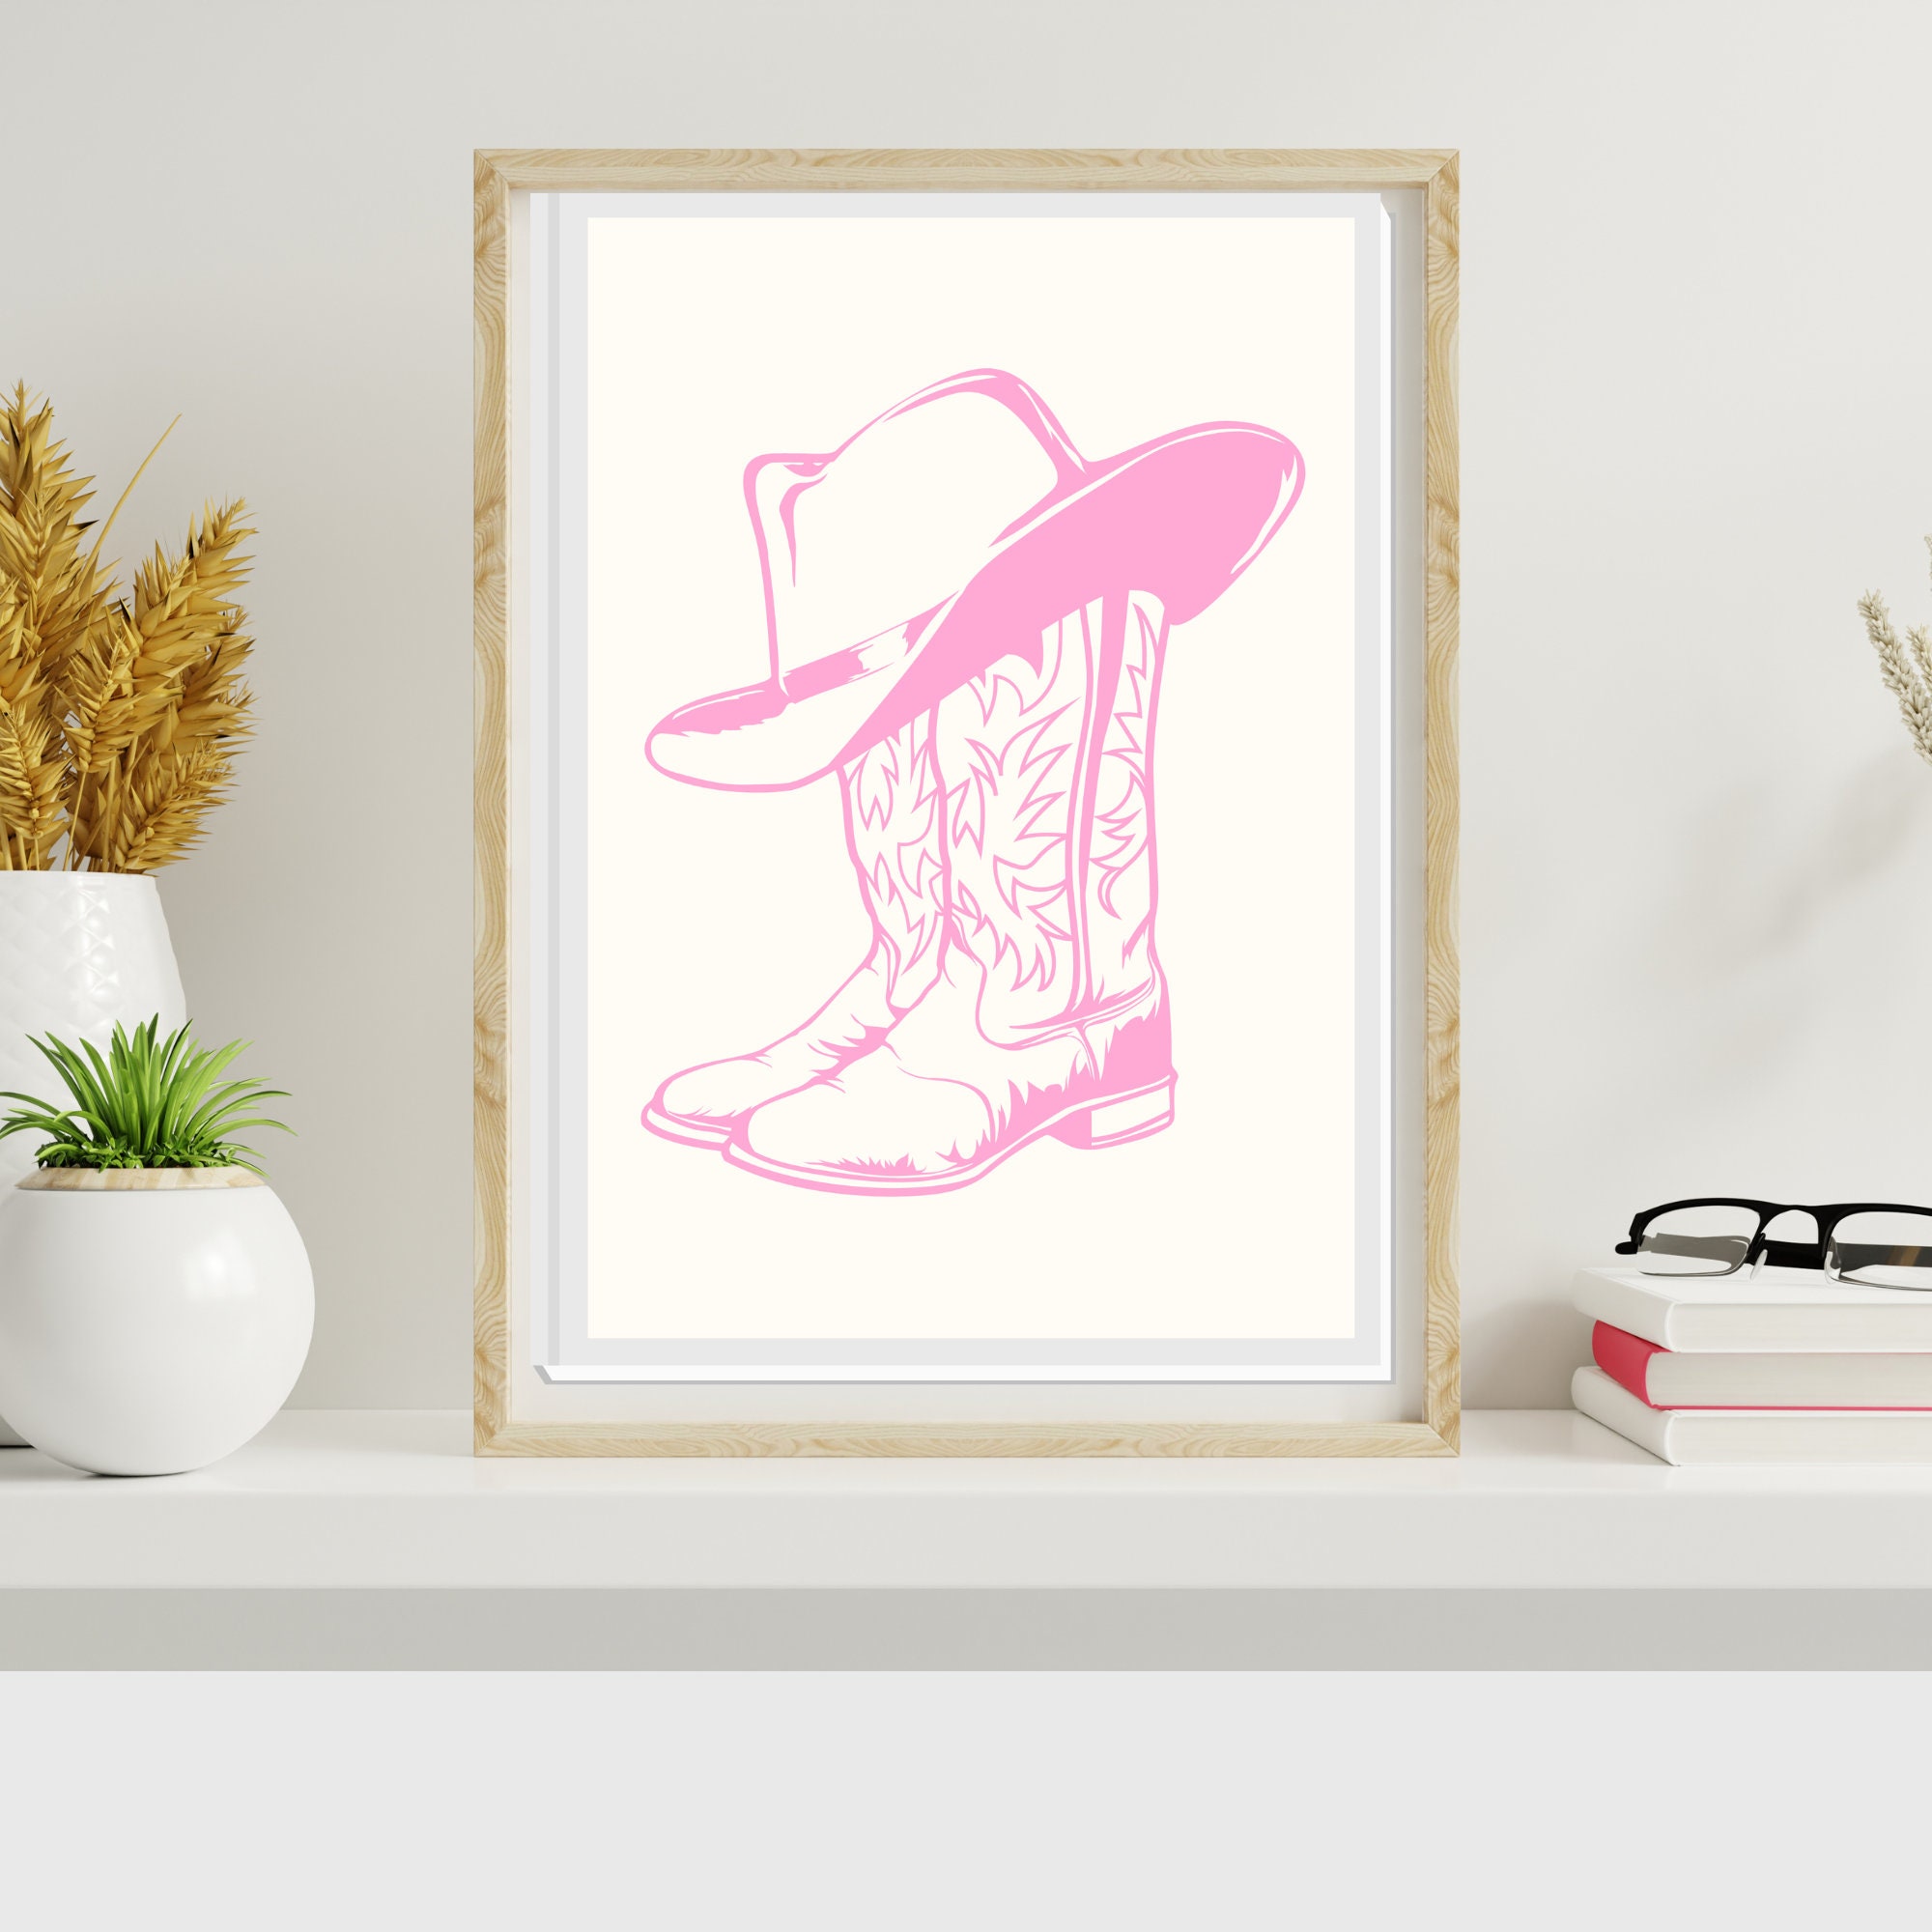 Cowgirl Boot Hat Printable Art, Pink Cowgirl Wall Art, Boho Wall Decor,  Western Illustration 